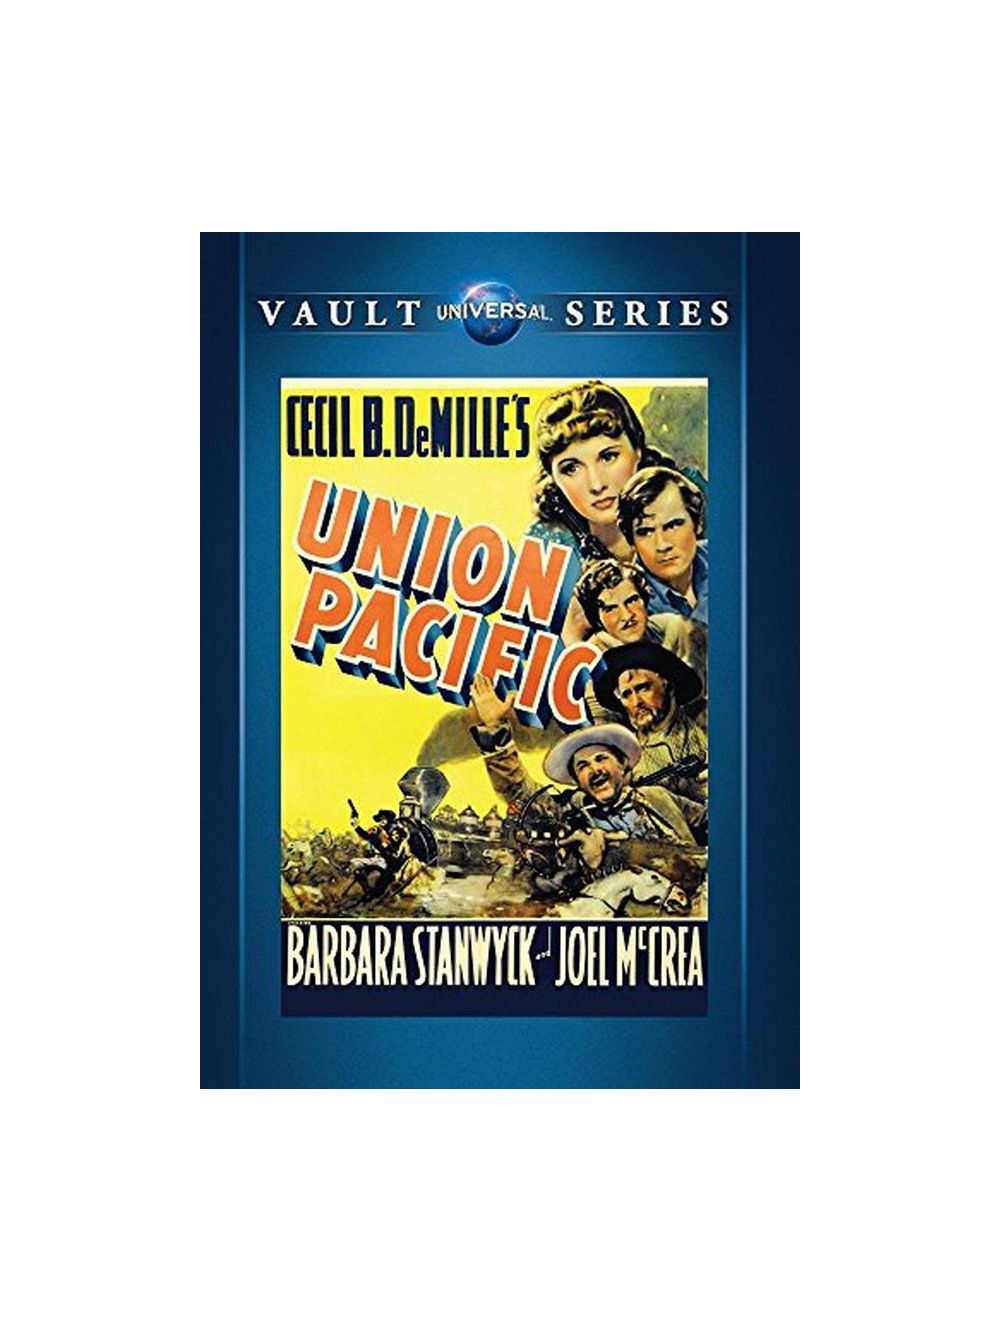 Universal Western Collection, DVD Database